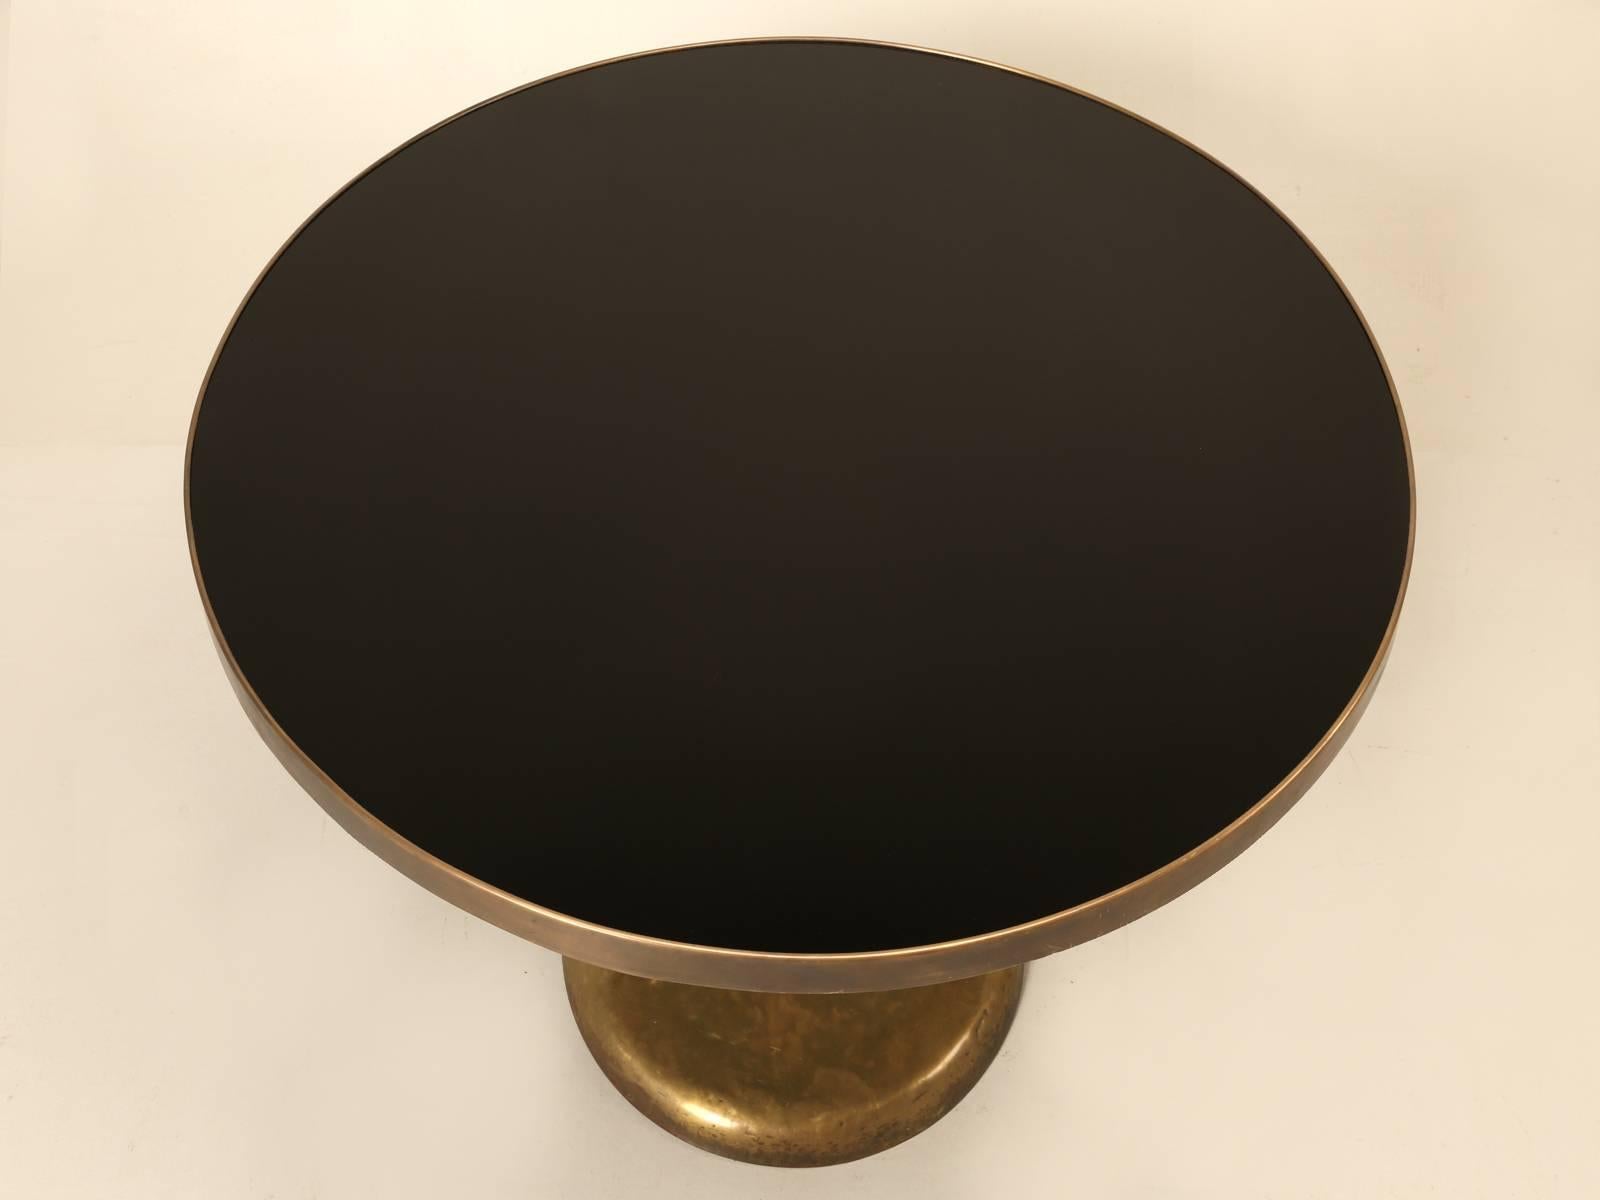 Although we purchased this stunning dining table in the south of France, we are thinking it could be Italian and probably crafted between 1940 and 1960. Constructed of hand-hammered brass and black glass. The table is both elegant and user friendly